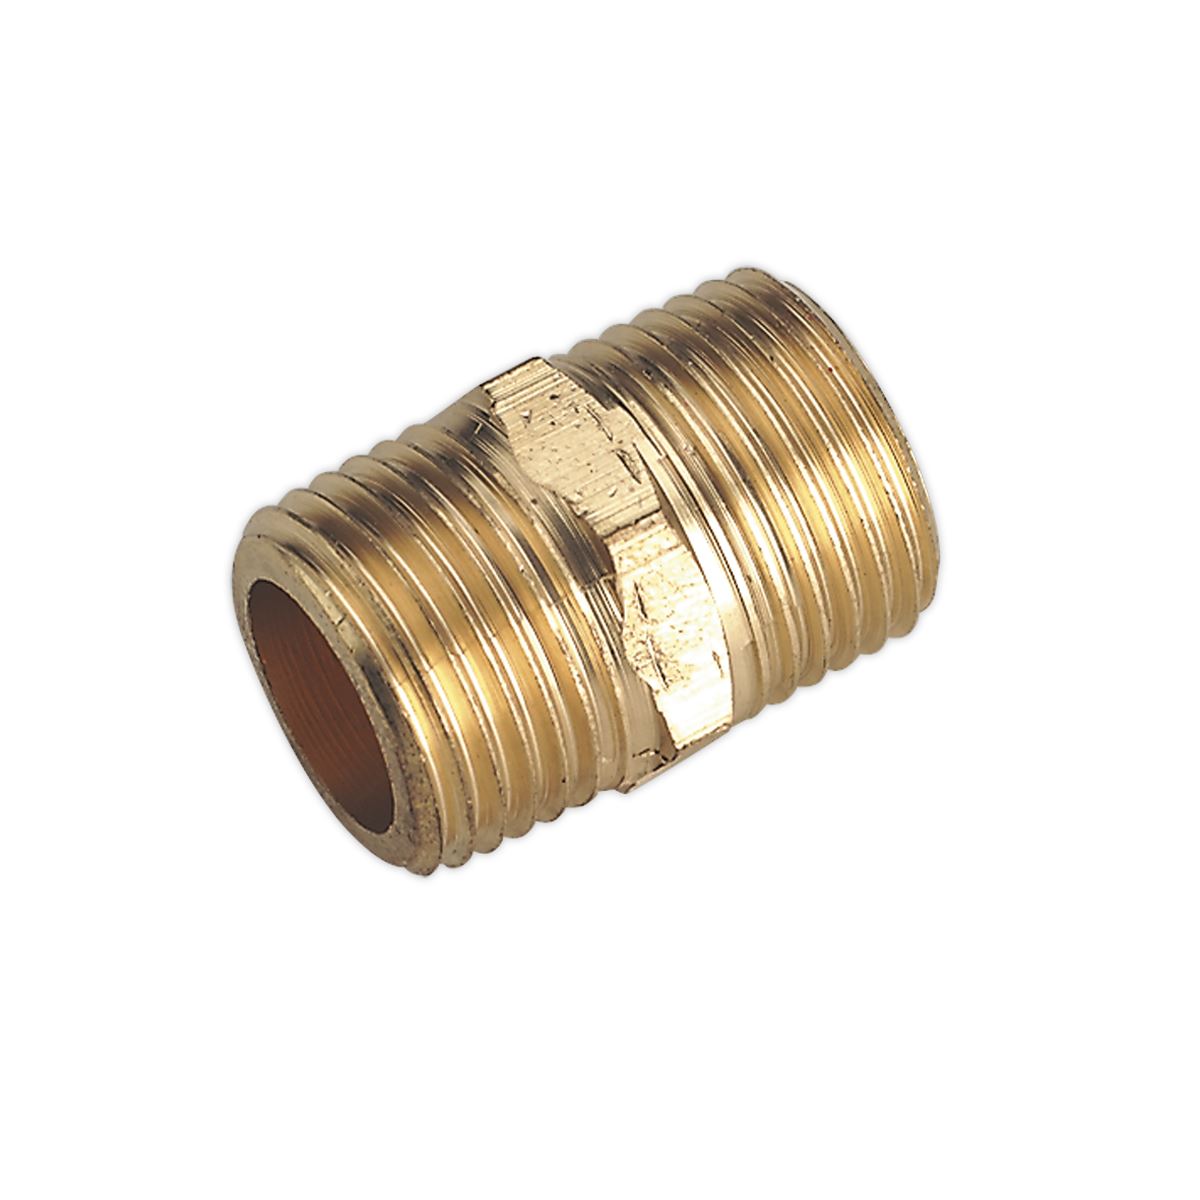 Sealey Double Male Union 1/2"BSPT to 1/2"BSPT